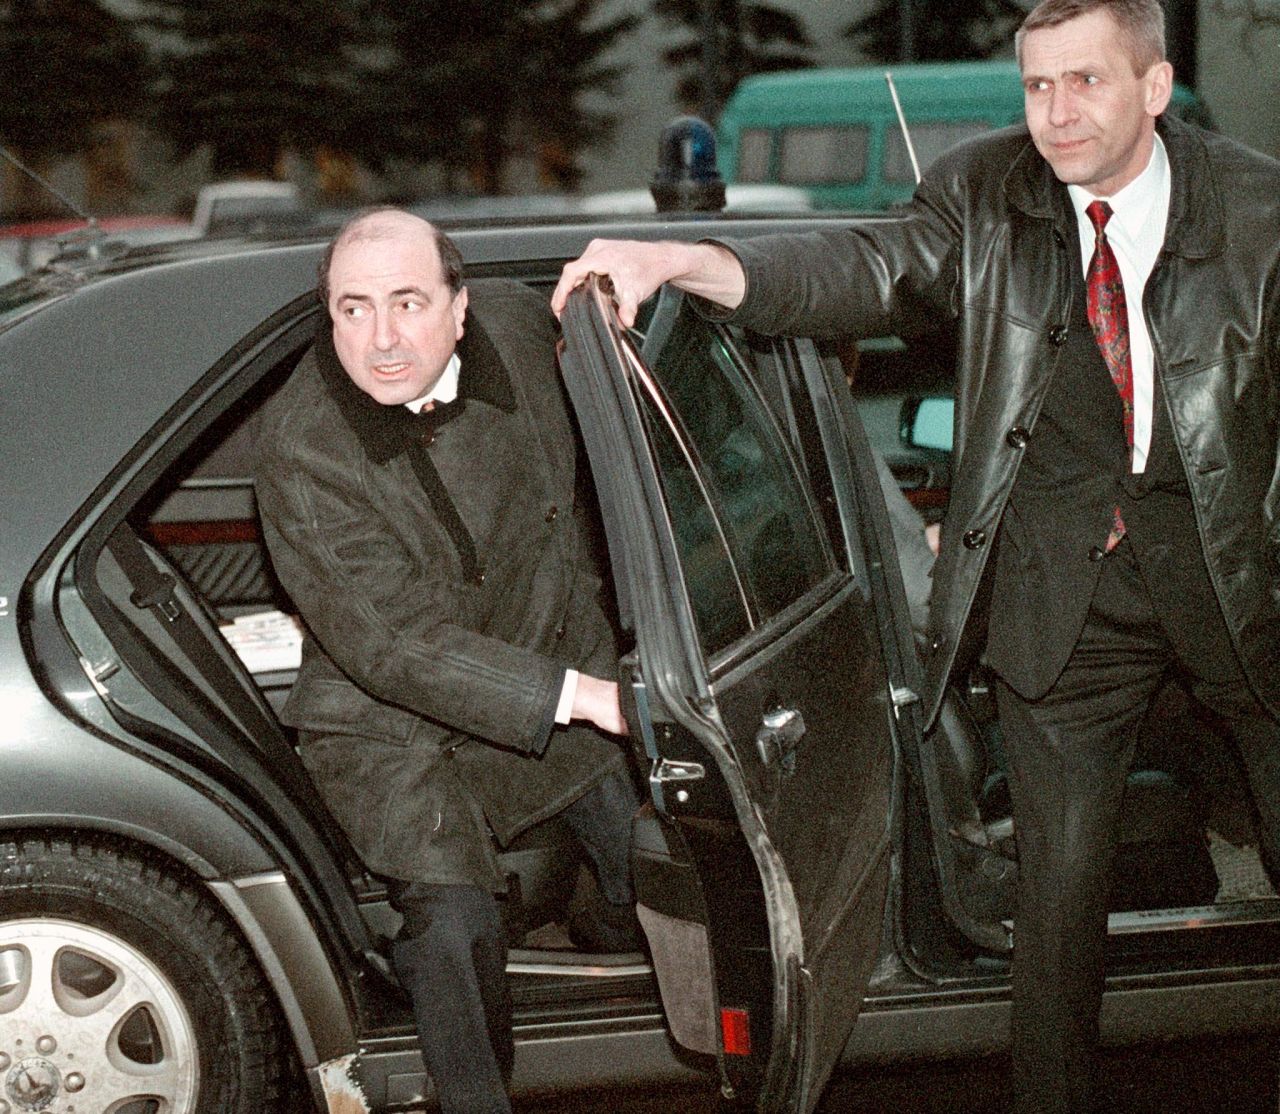 Boris Berezovsky began his working life as a math professor, and then a systems analyst, before switching to more lucrative jobs, according to CNN's Jill Dougherty. He is pictured here at Moscow airport in 1999.